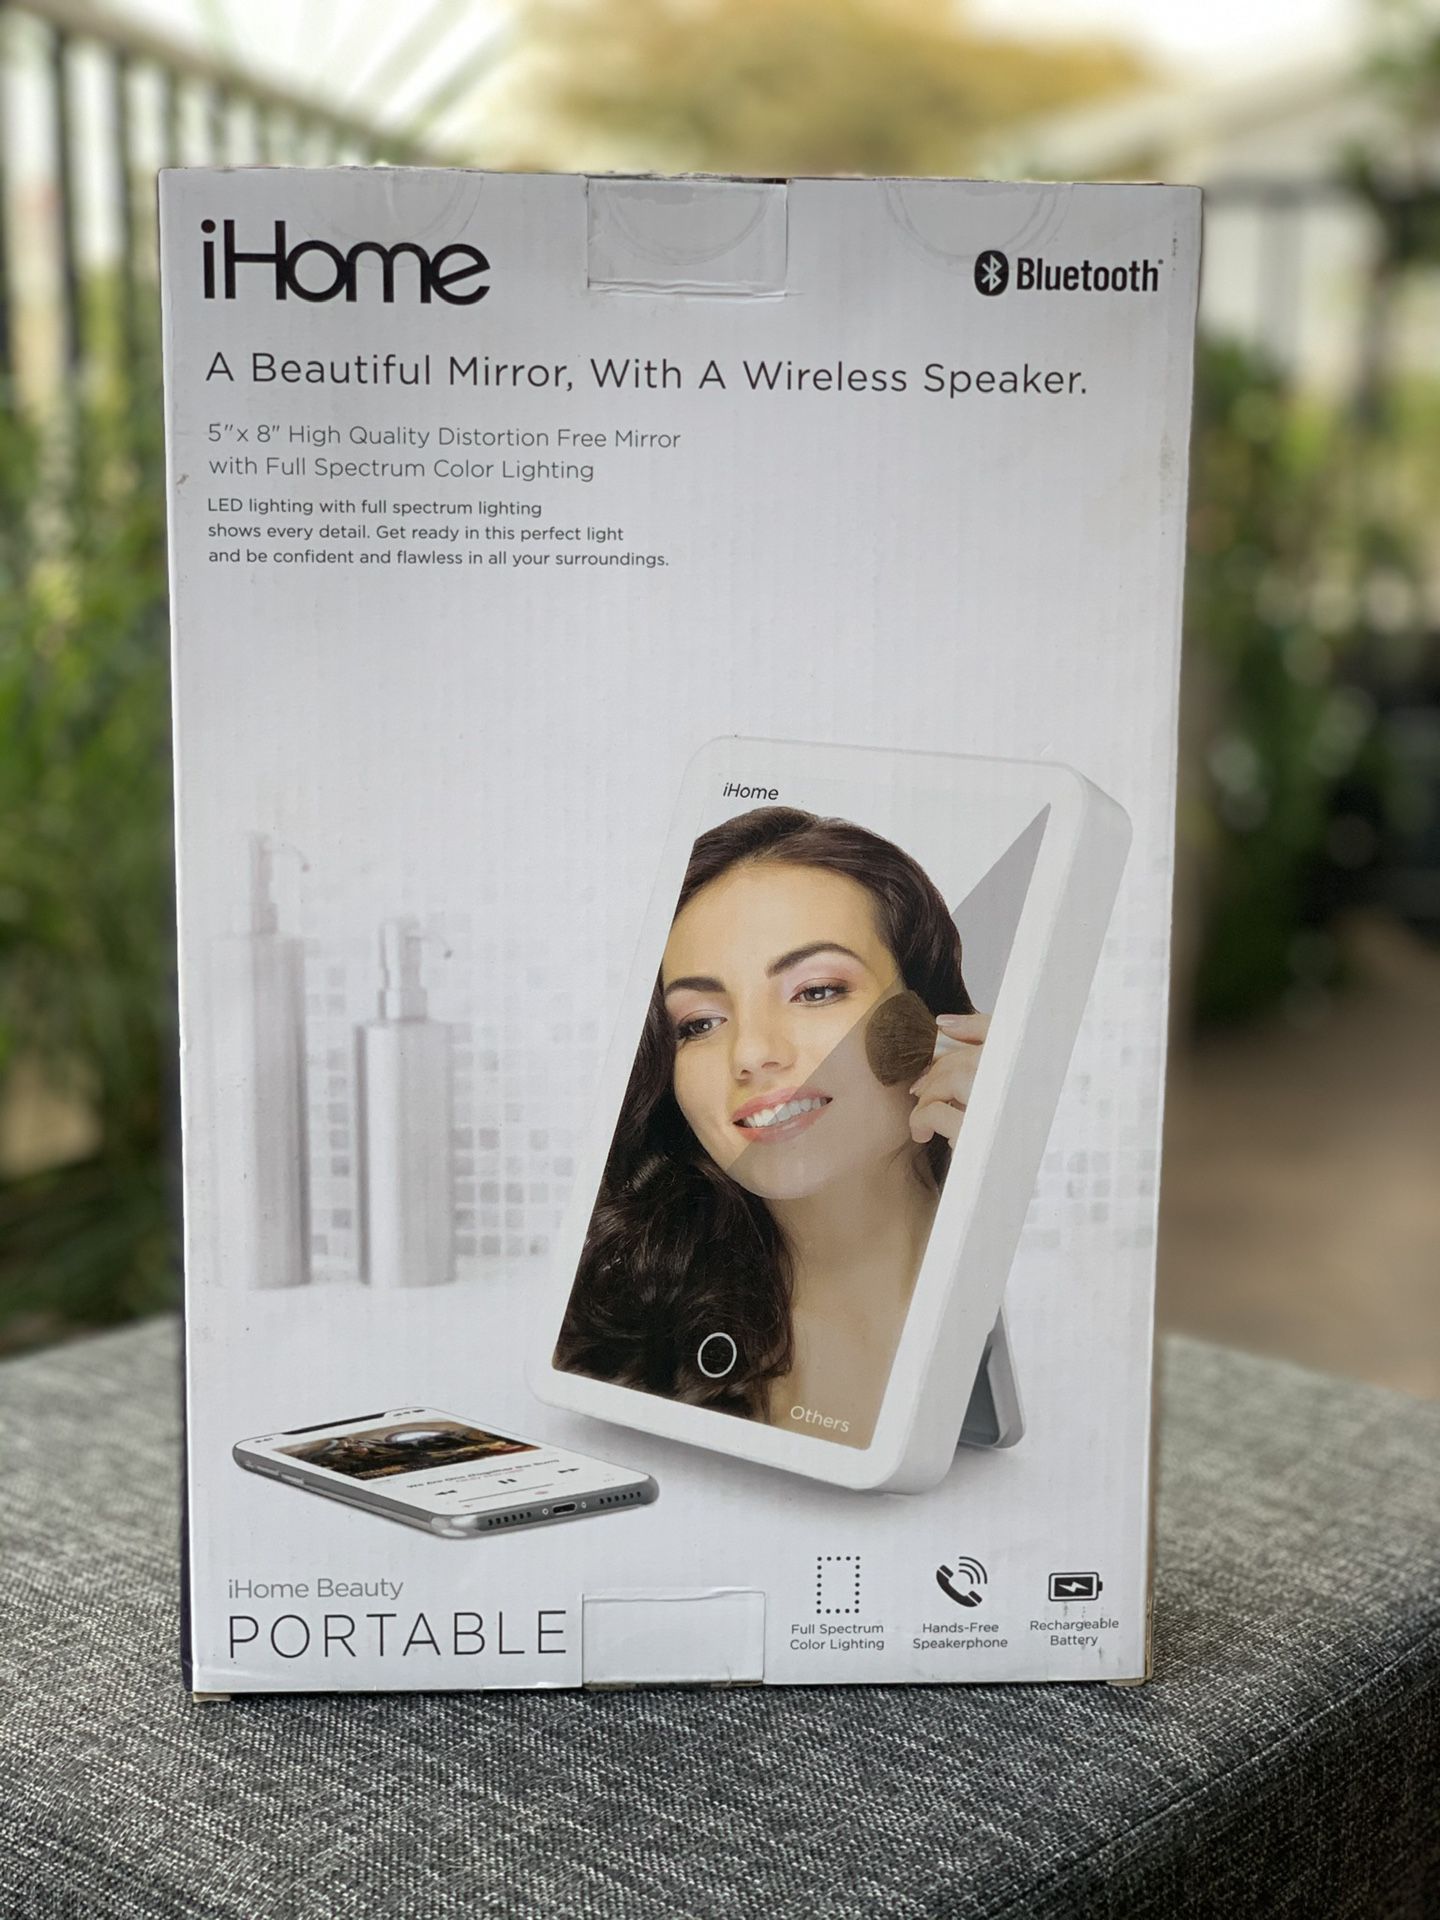 iHome Portable Mirror with built in wireless speaker